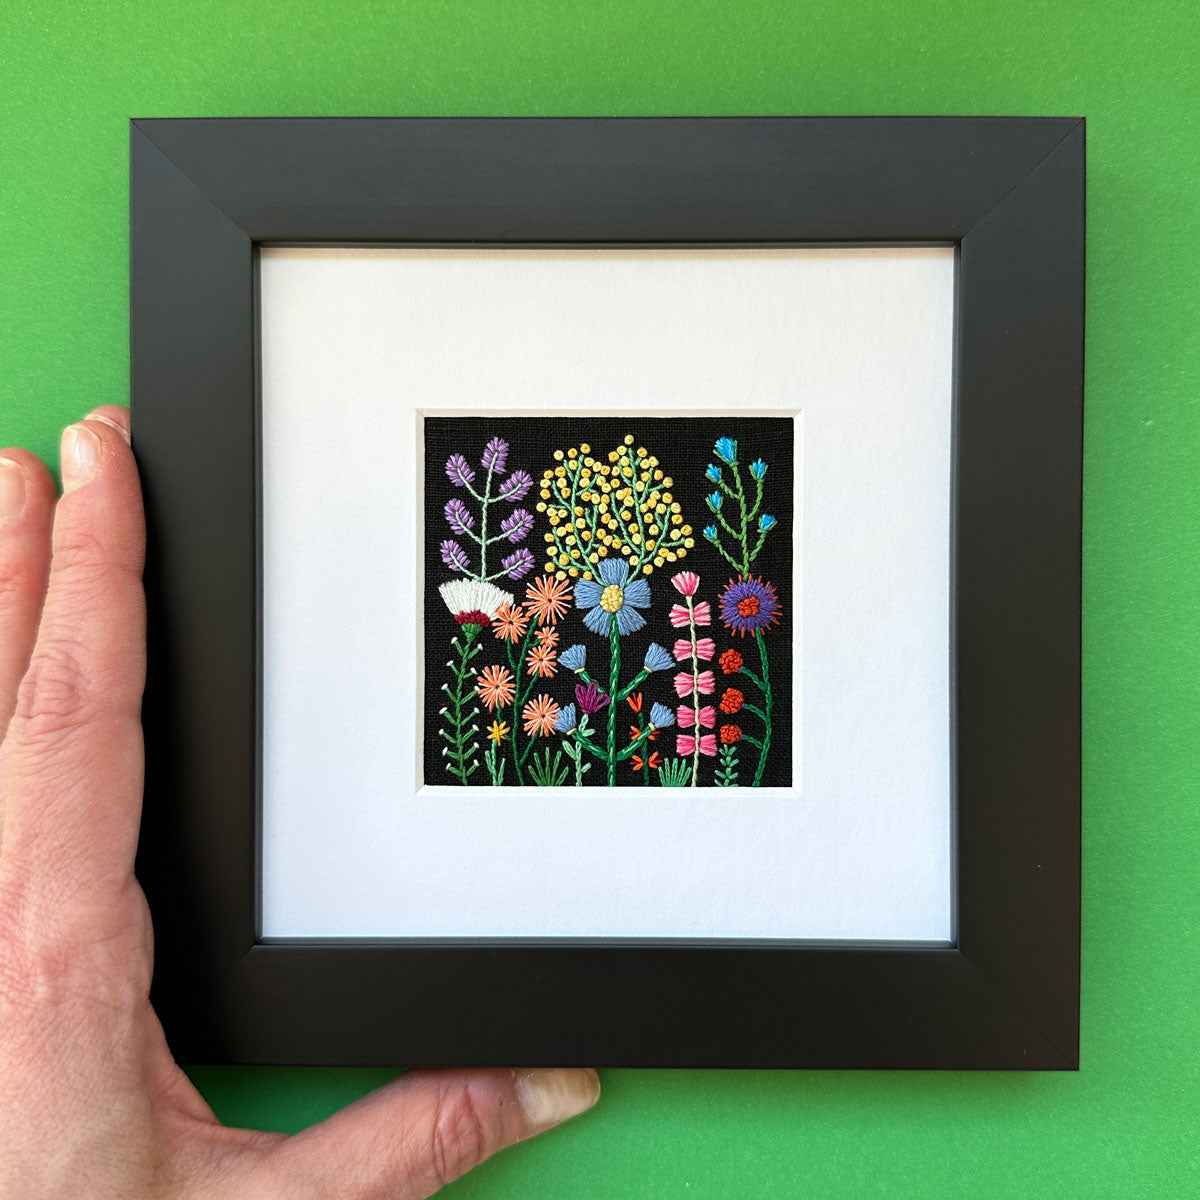 Rainbow Flowers B (2.5" Square) on Black Linen Hand Embroidered Art